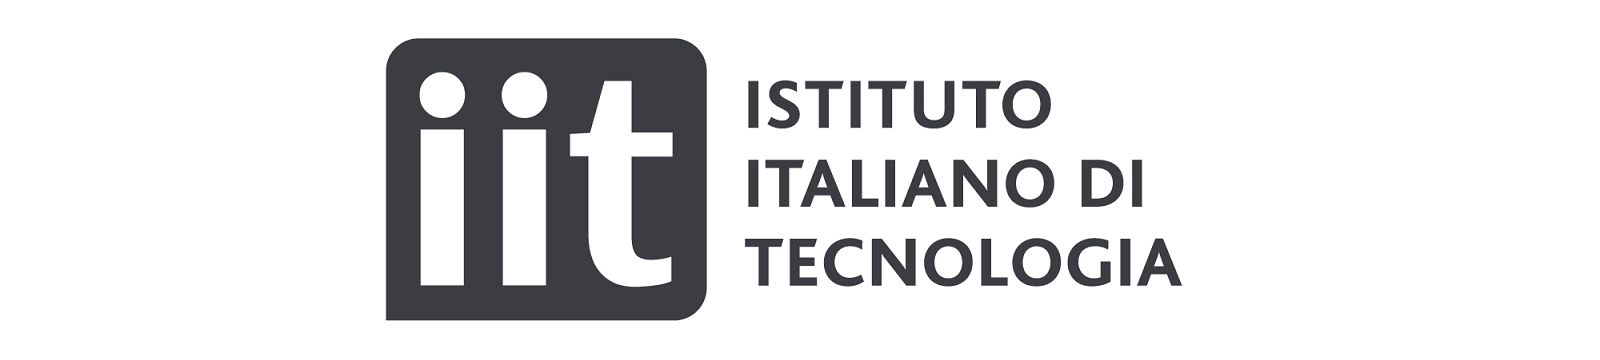 The Italian Institute of Technology has joined ICDI